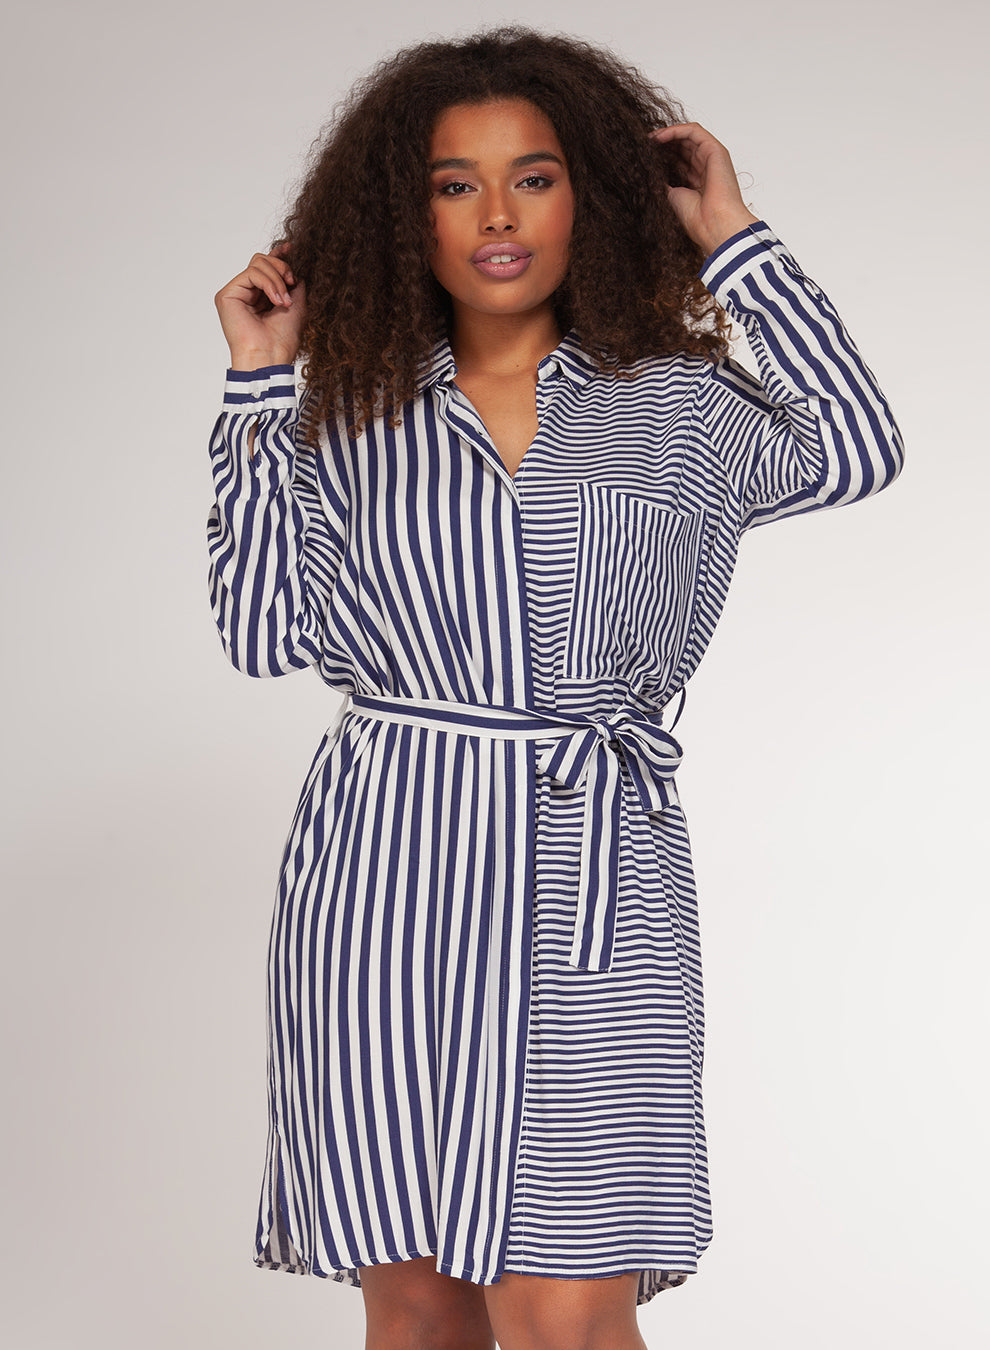 Striped Shirt Dress - Navy/White - Plus
This relaxed striped shirt dress is unlined with exposed buttons, tie belt is perfect for day or evening. Fiber Content: 55% linen 45% viscose Fit is true to size.
Striped Shirt Dress - Navy/White - Plus
This relaxed striped shirt dress is unlined with exposed buttons, tie belt is perfect for day or evening. 
1572278-1

$49.99
$49.99
$49.99
button through shirt dress, plus shirt dress, plus size shirt dress, sale, shirt dress, shirt dress plus size, stripe plus size d